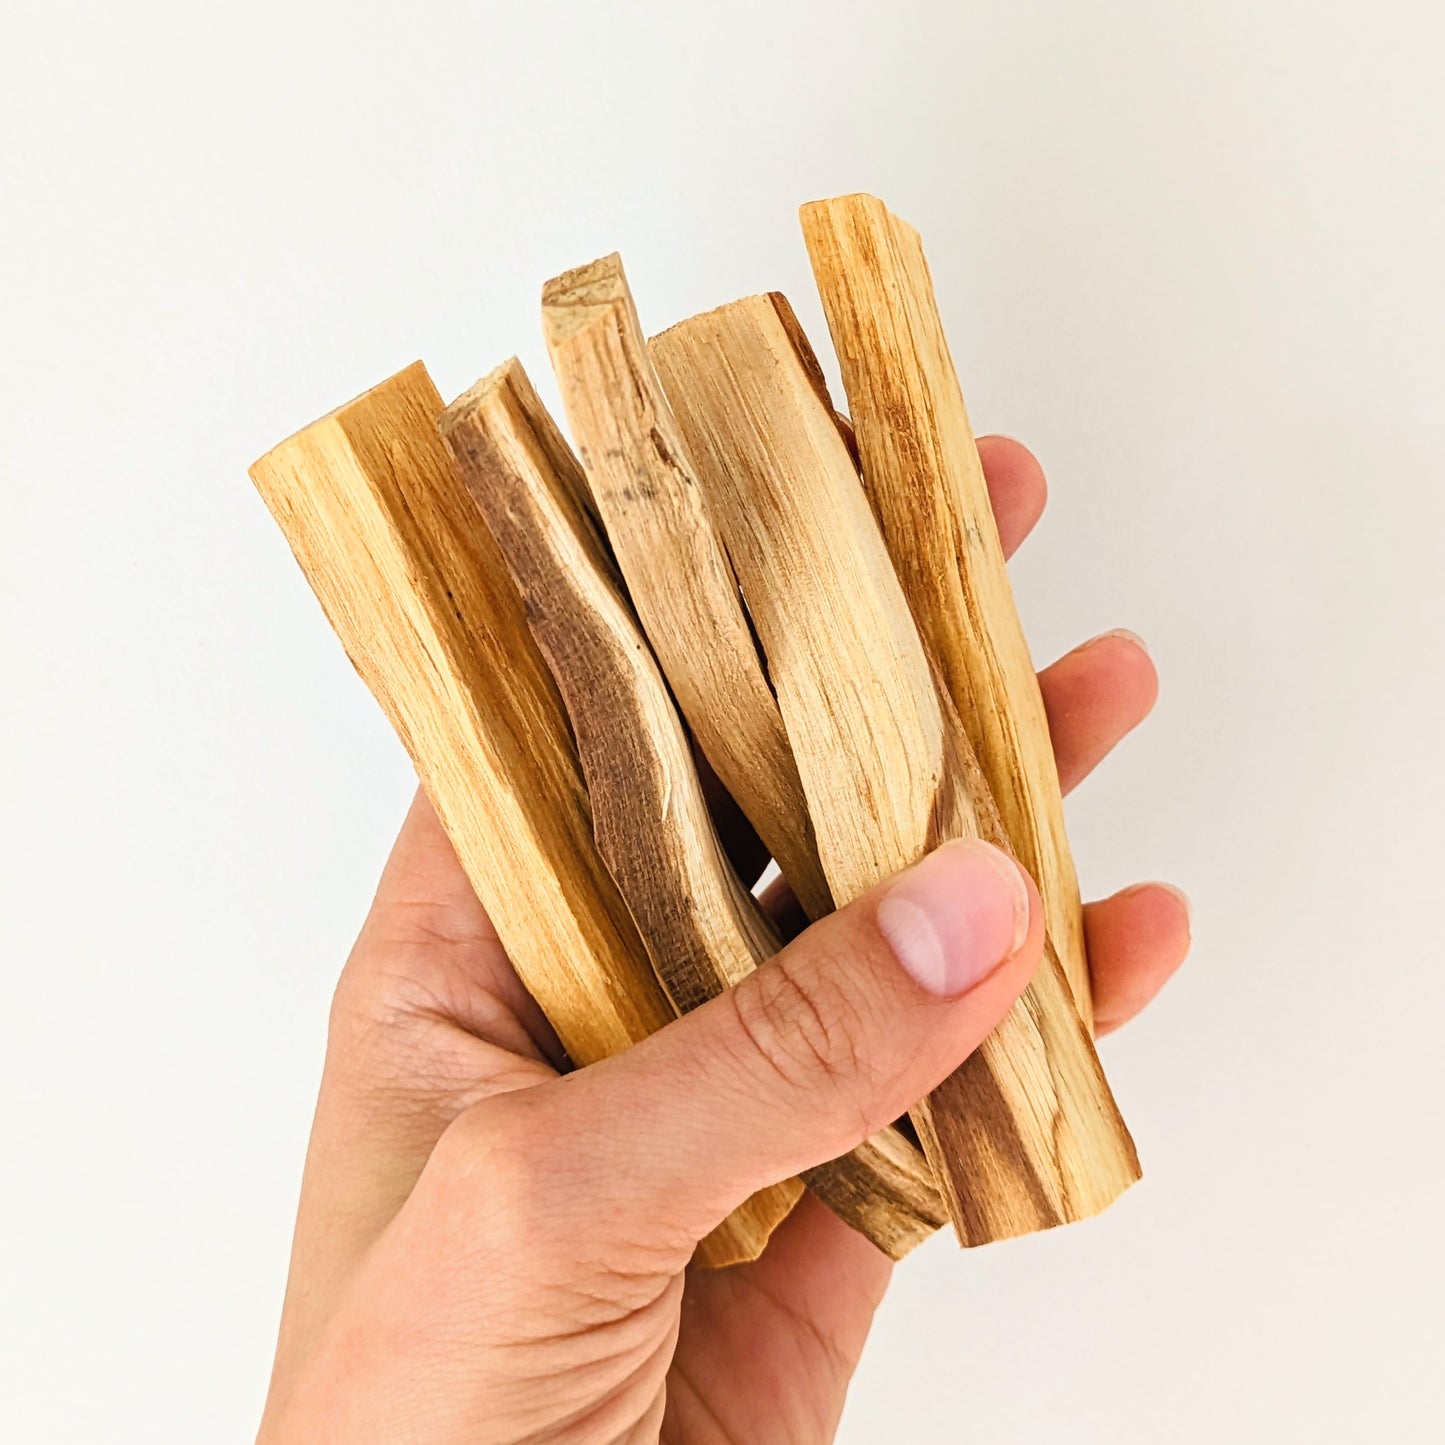 Palo Santo Wood Sticks SERFOR Certified Sustainably Harvested - High Resin Holy Wood